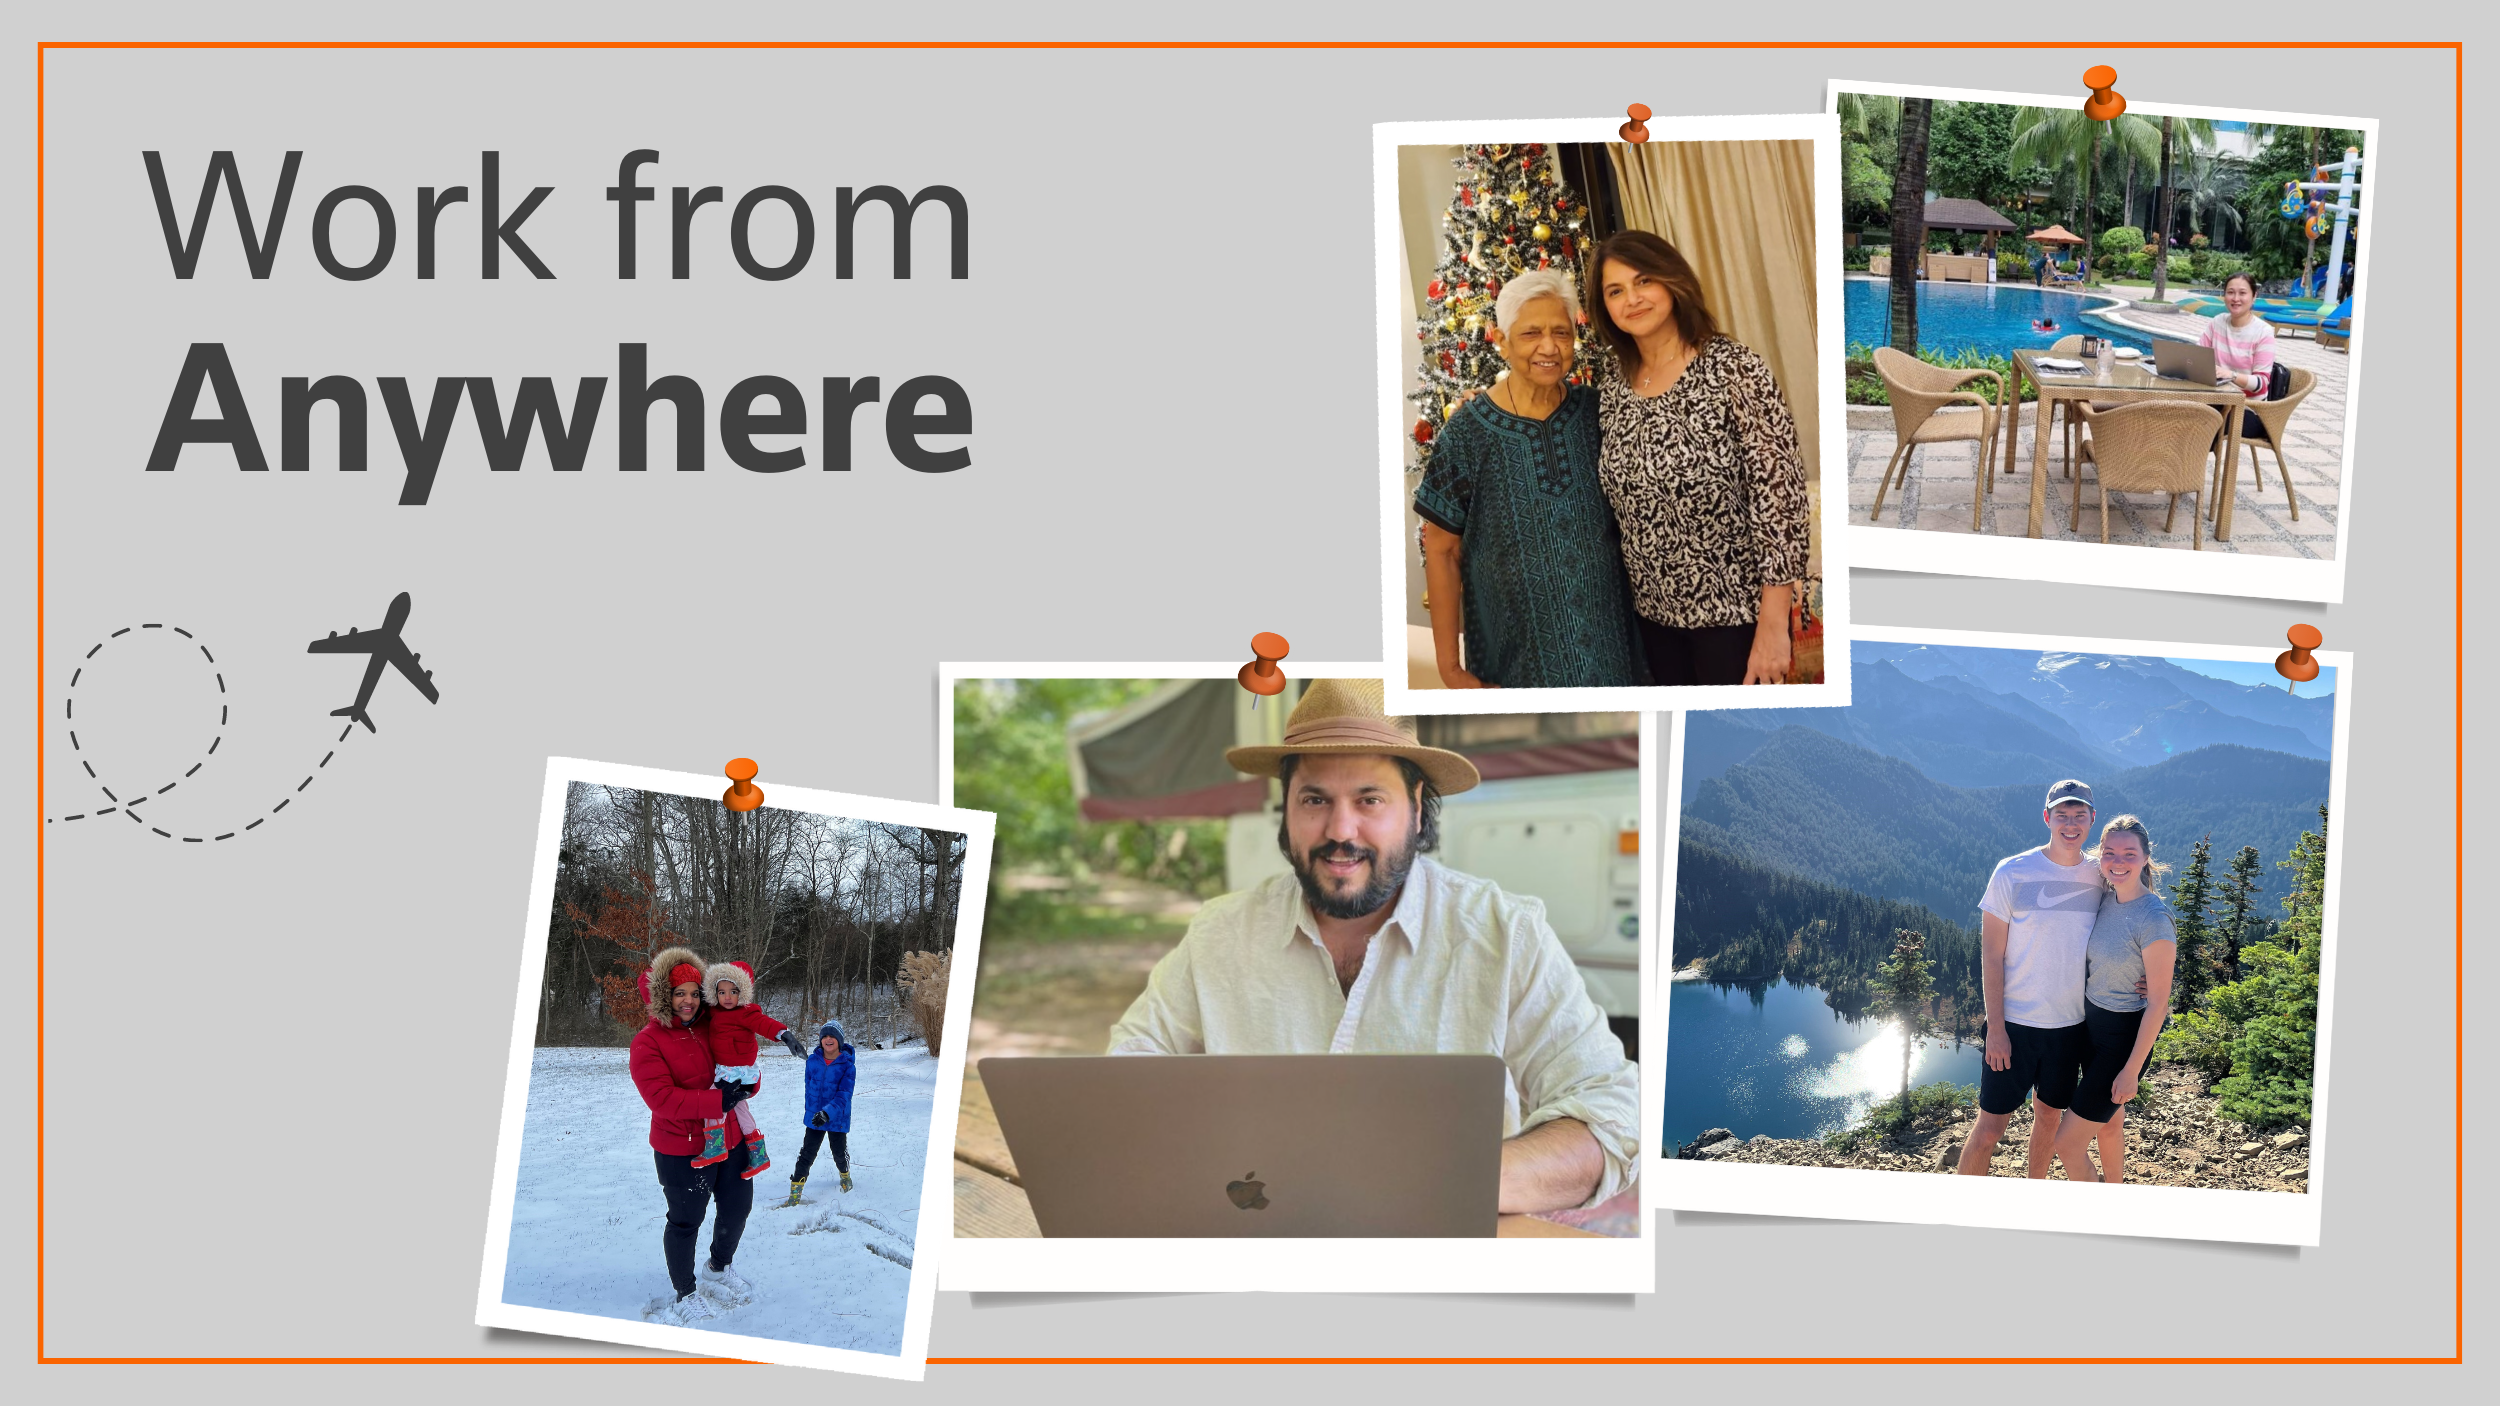 Work from Anywhere. Five photos of Thomson Reuters teammates taking advantage of the benefit and working remotely from different locations.